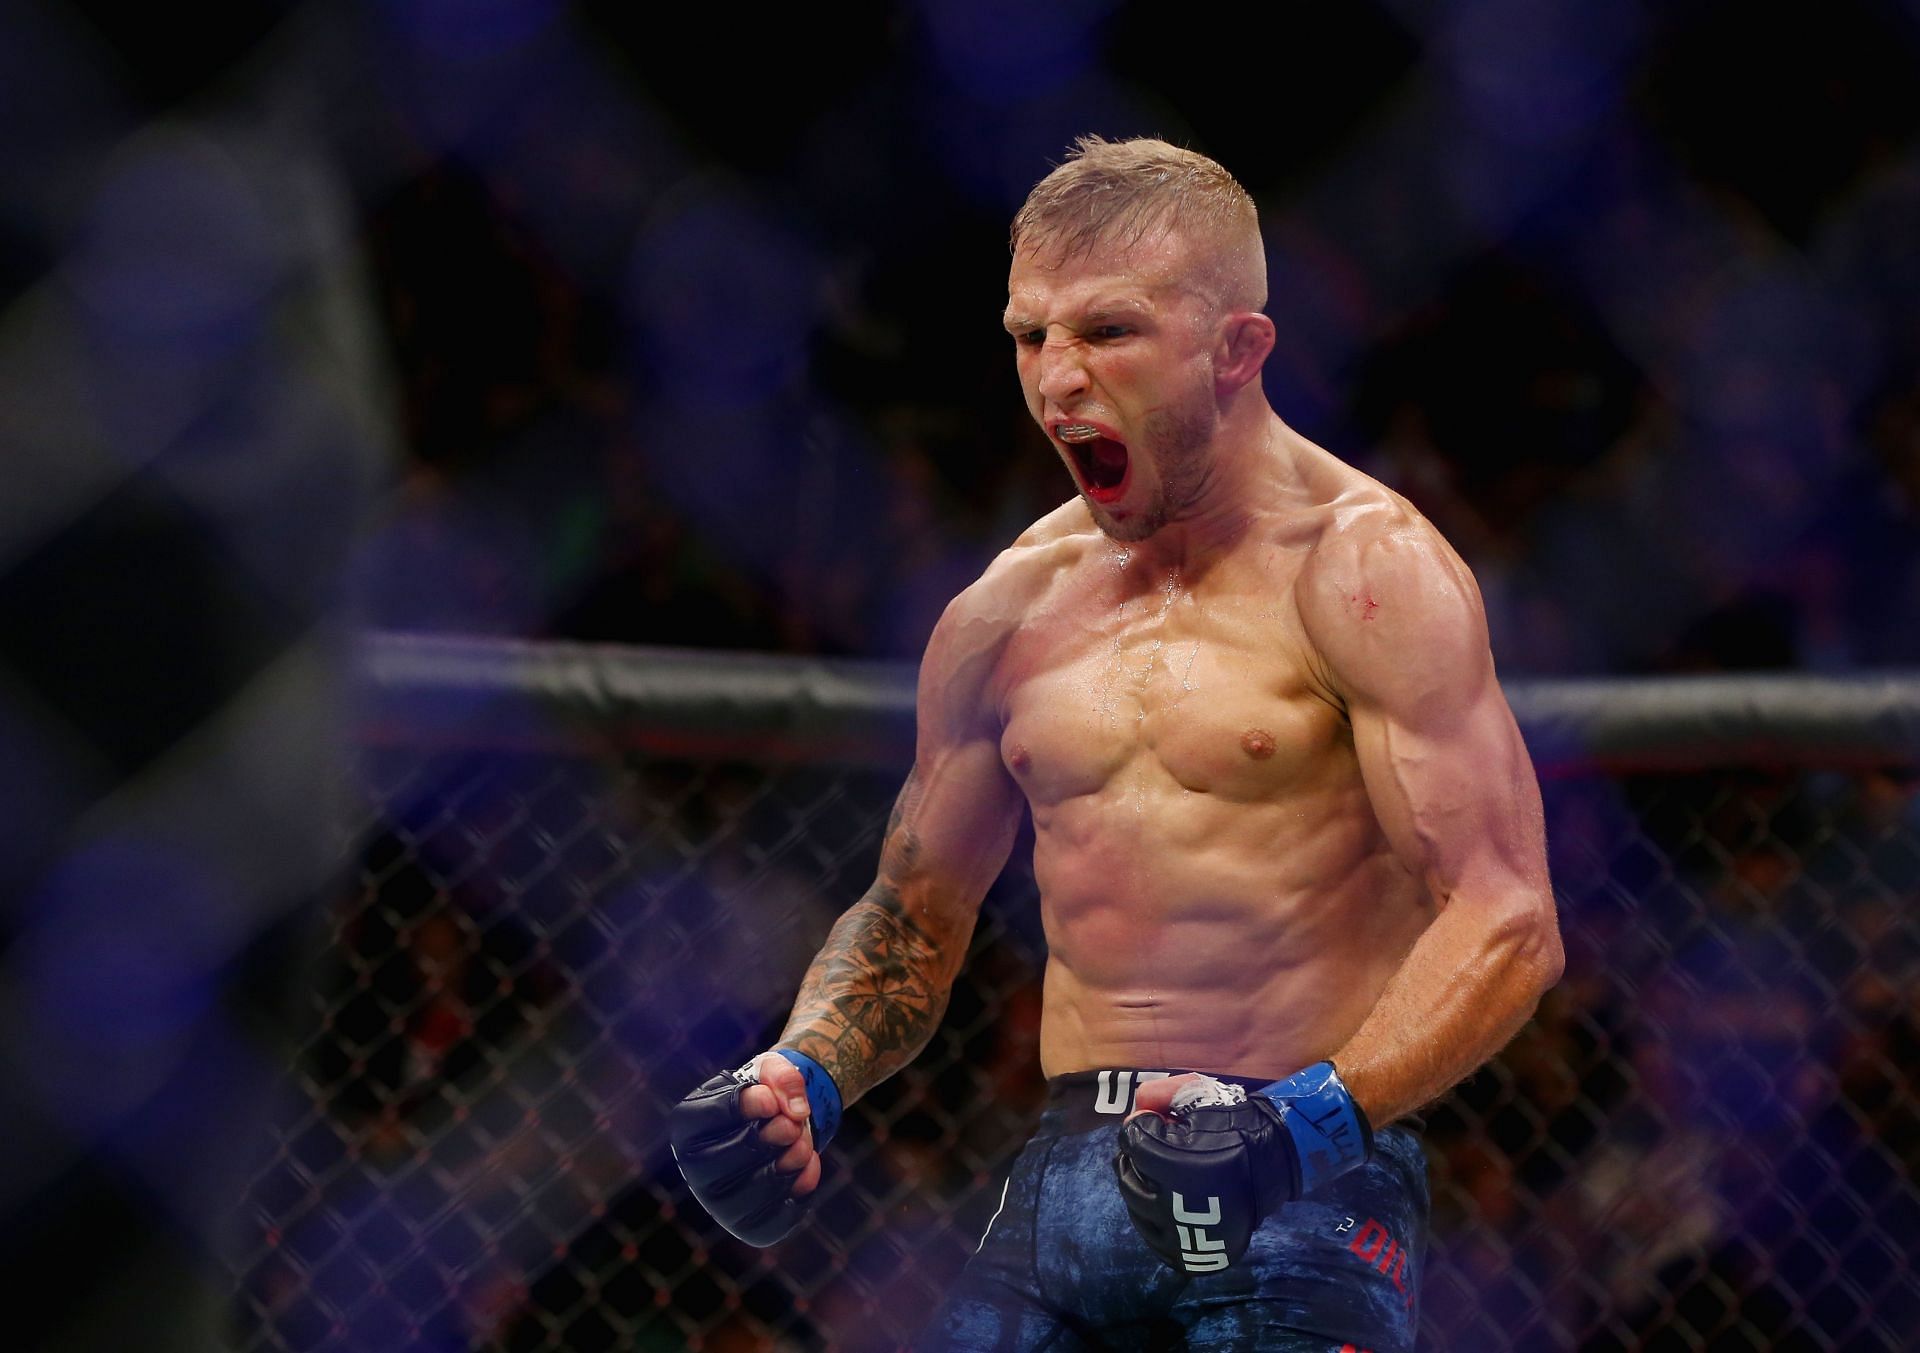 Dillashaw was the runner-up on the 14th season of The Ultimate Fighter